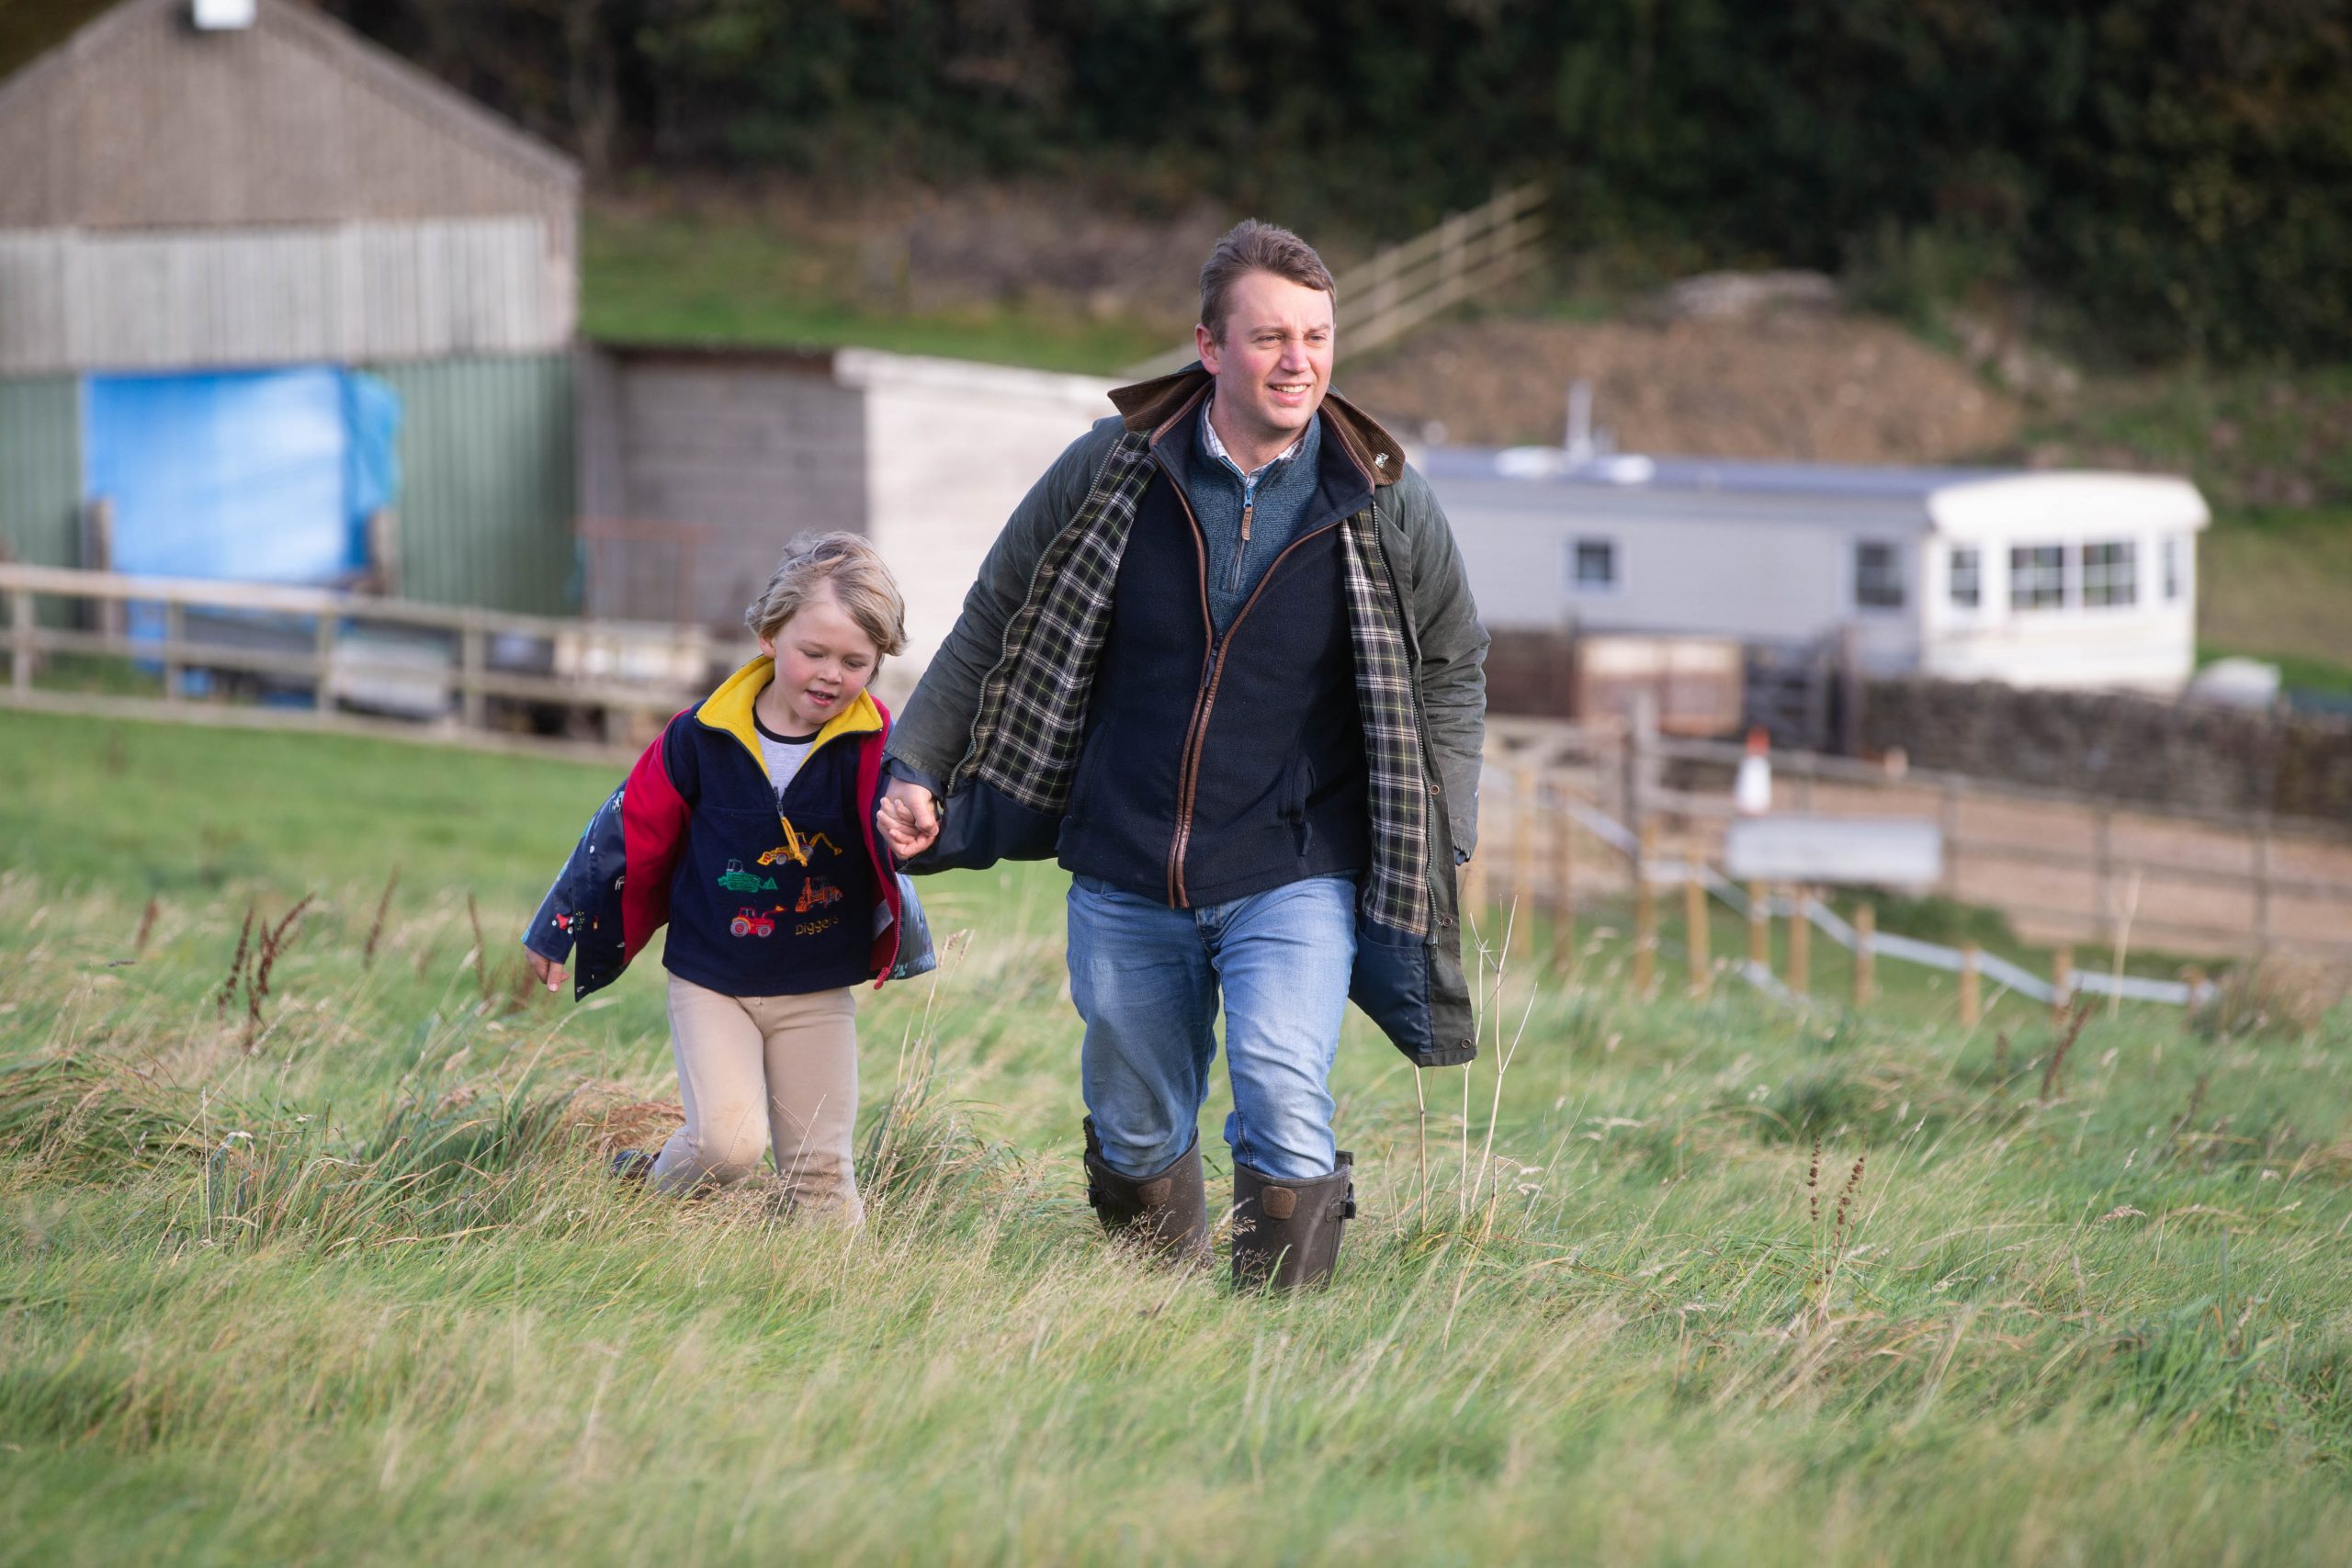 FARMING | RABI commissions England and Wales’ largest ever research project into farmer wellbeing